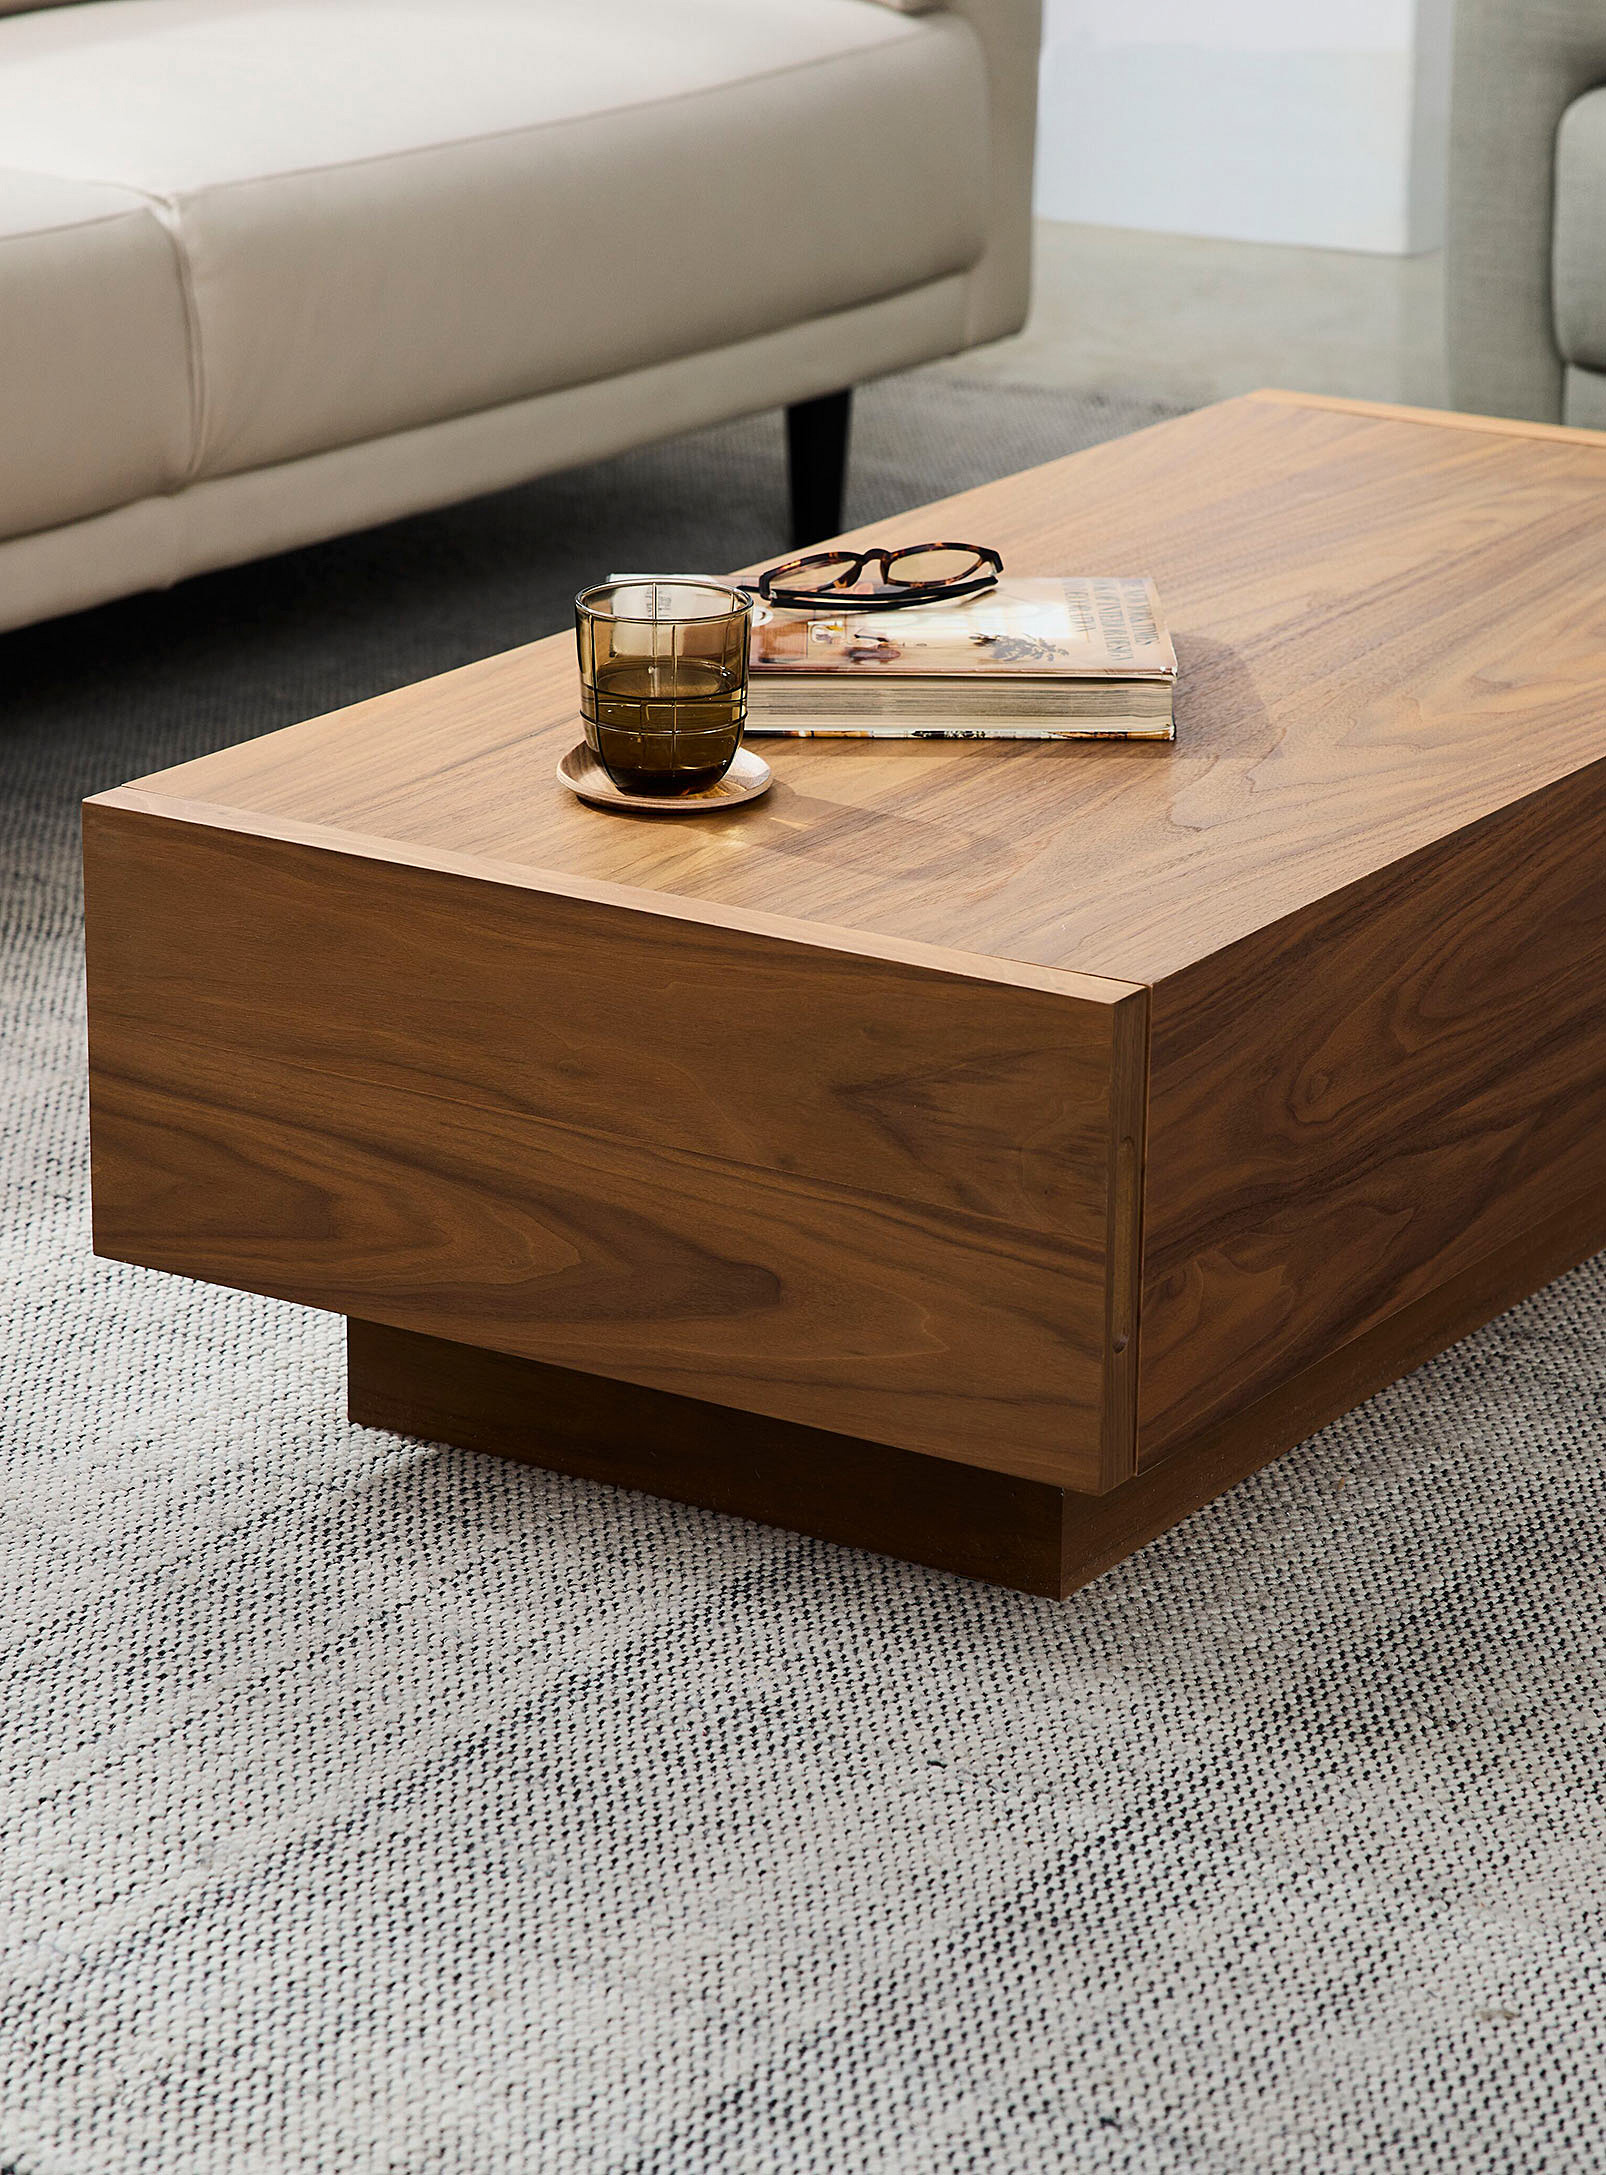 Eq3 Hidden Drawers Floating Coffee Table In Brown